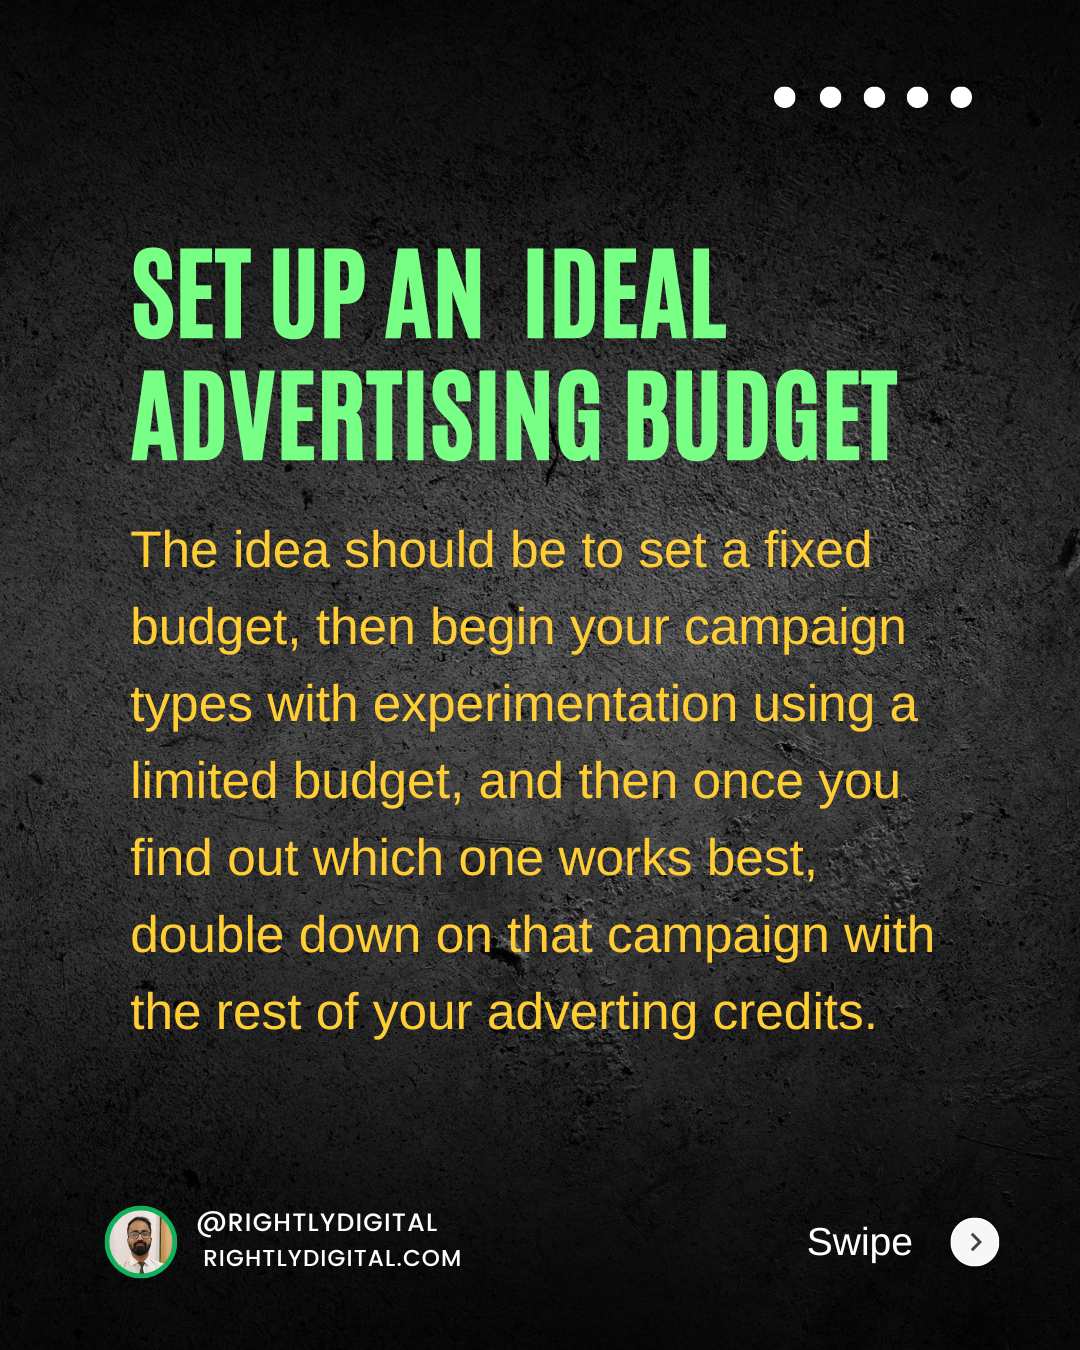 The idea should be to set a fixed budget, then begin your campaign types with experimentation using a limited budget, and then once you find out which one works best, double down on that campaign with the rest of your adverting credits. 